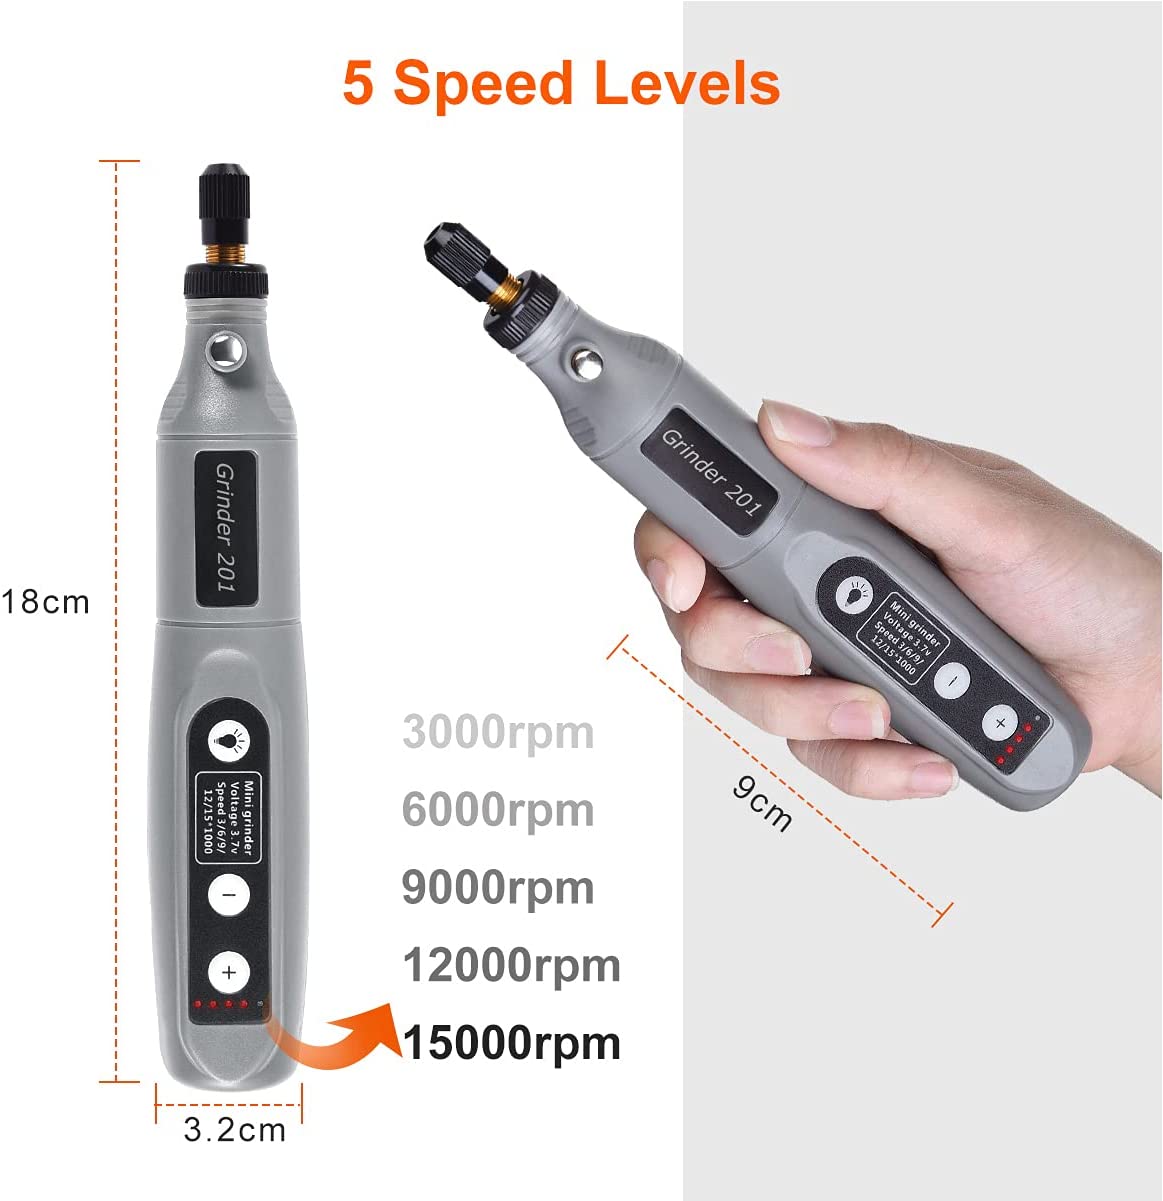 Cordless Mini Rotary Tool Set - 50Pcs Accessories 3.7V 5 Speed 3000rpm to 15000rpm Rotary Tool Kit USB Rechargeable